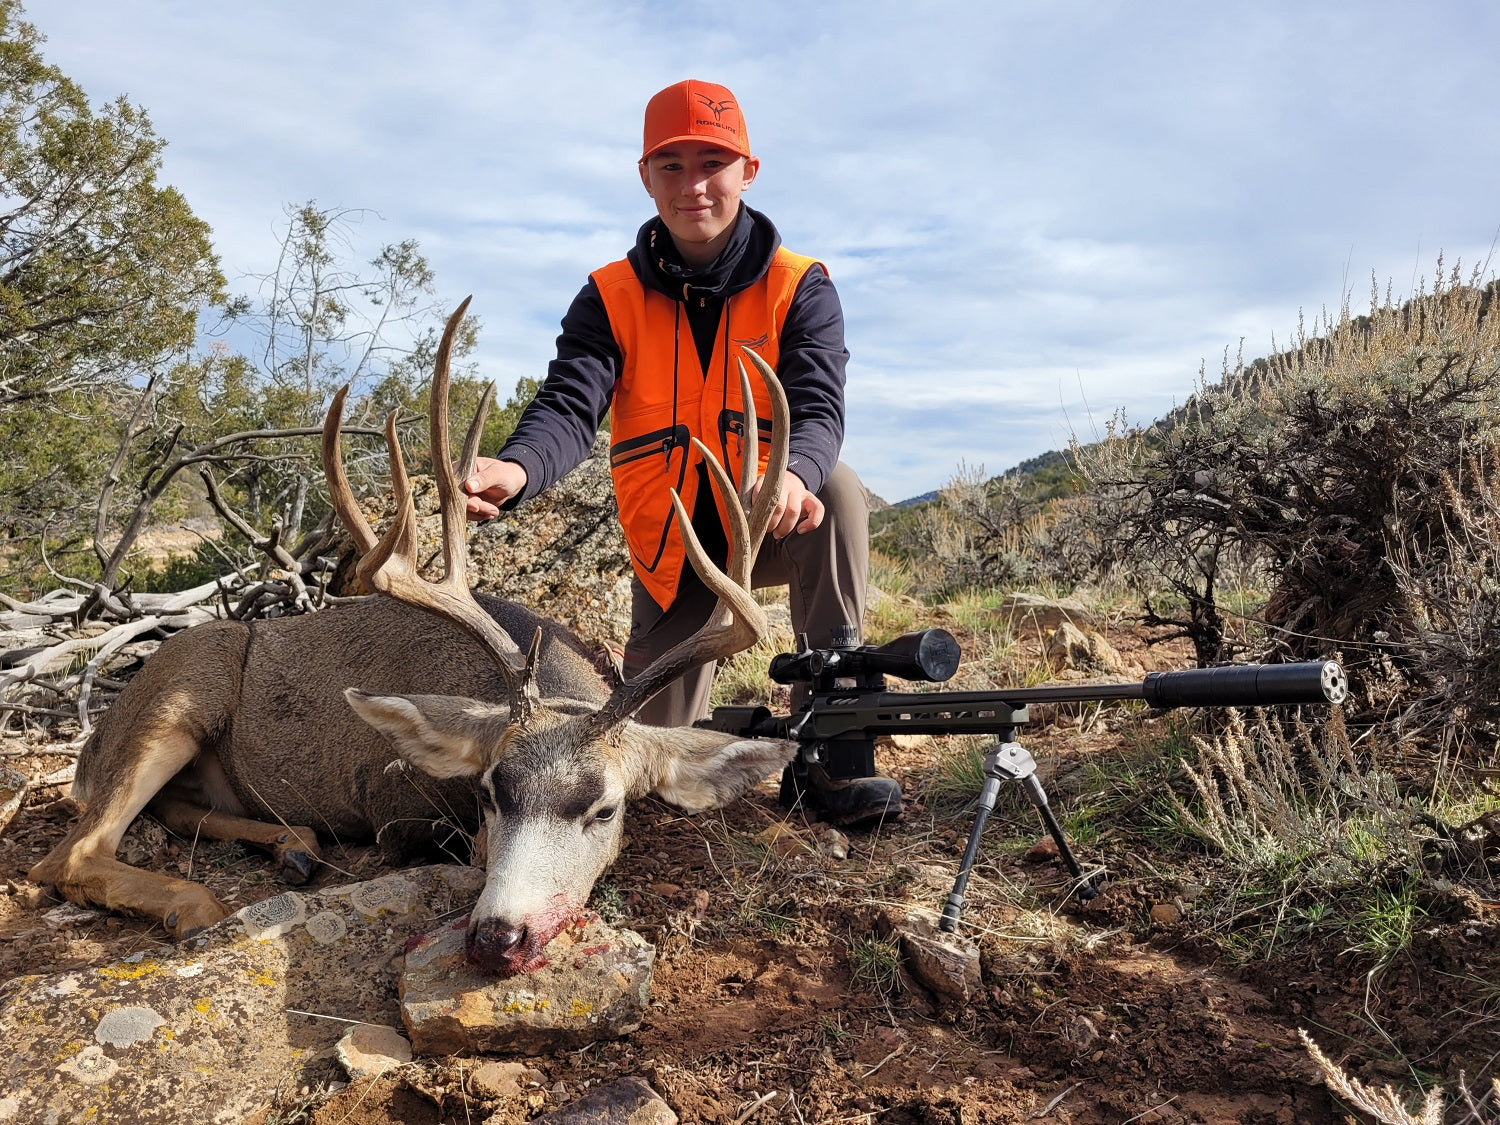 4 point mule deer buck held by the author’s son, next to his rifle with Javelin Pro Hunt bipod